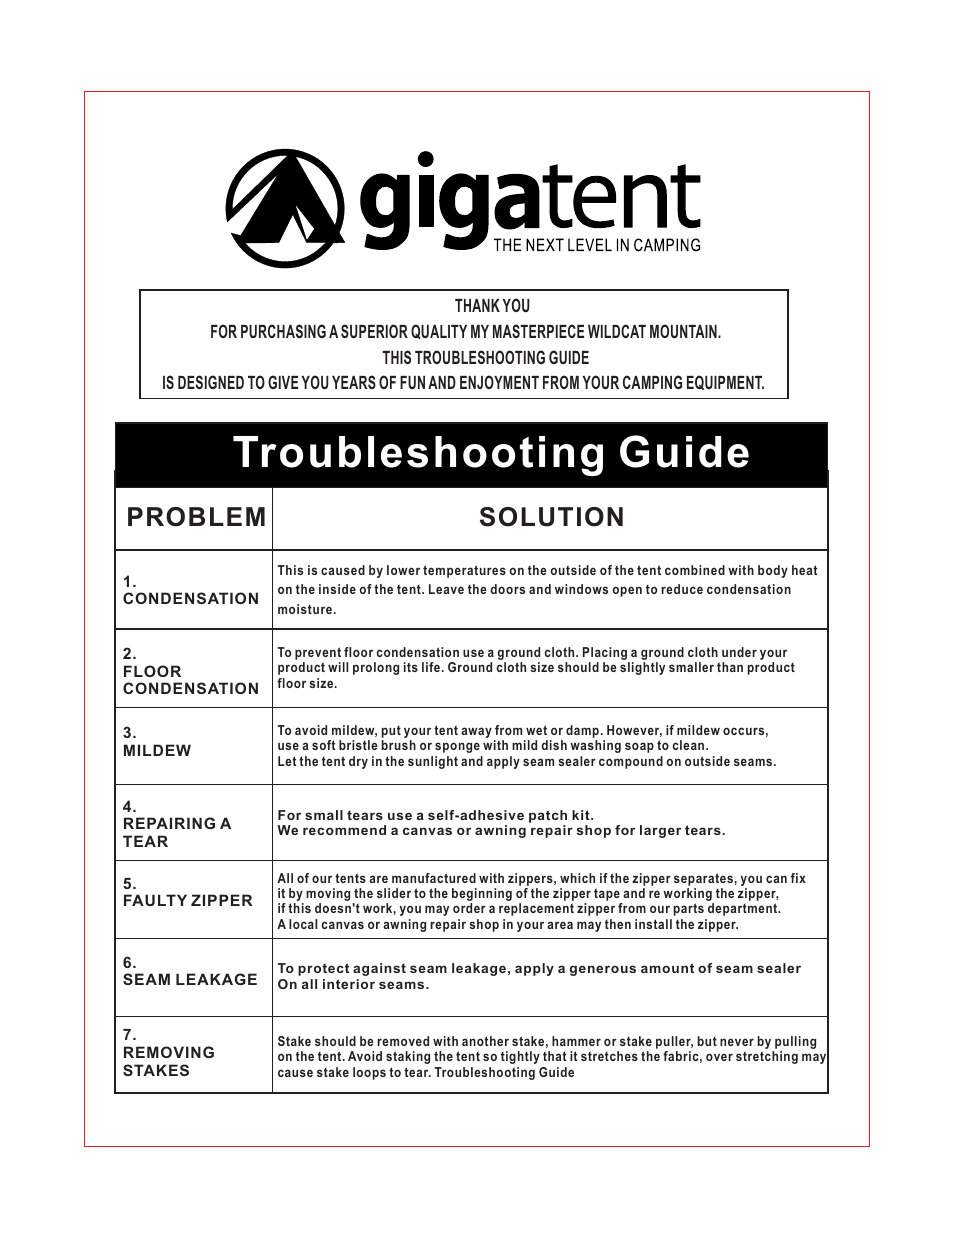 Troubleshooting guide, Problem solution | Giga Tent FT 052 User Manual | Page 6 / 8